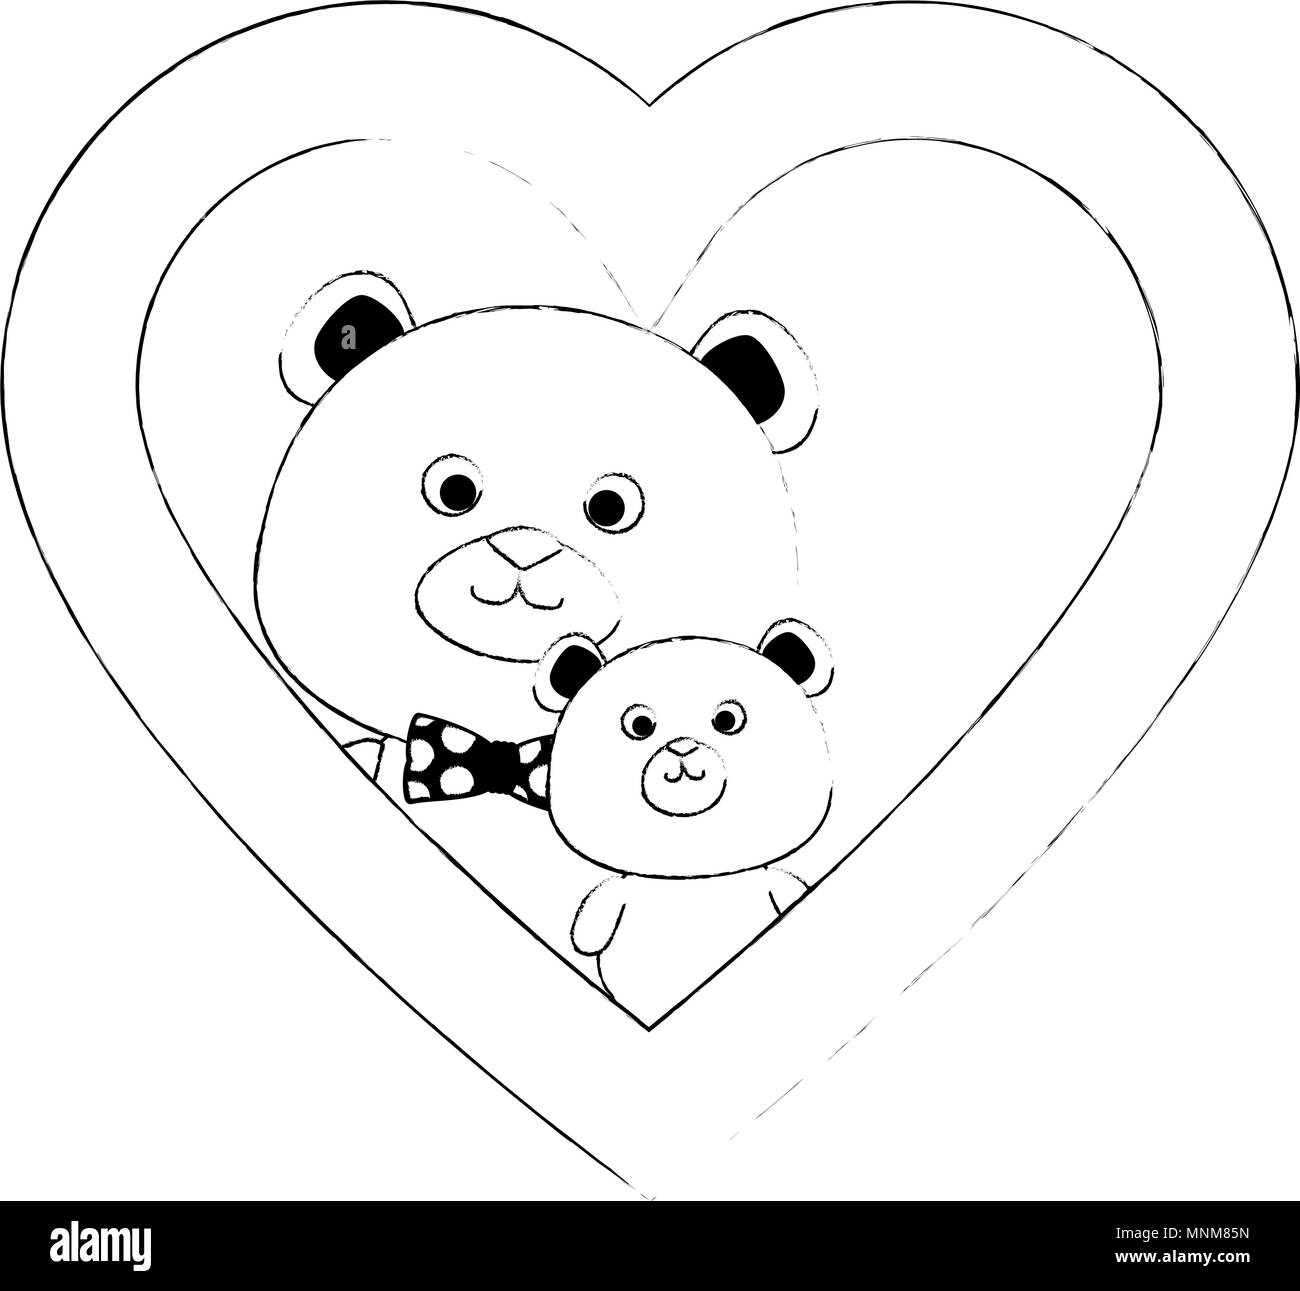 Teddy bears in love Black and White Stock Photos & Images - Alamy